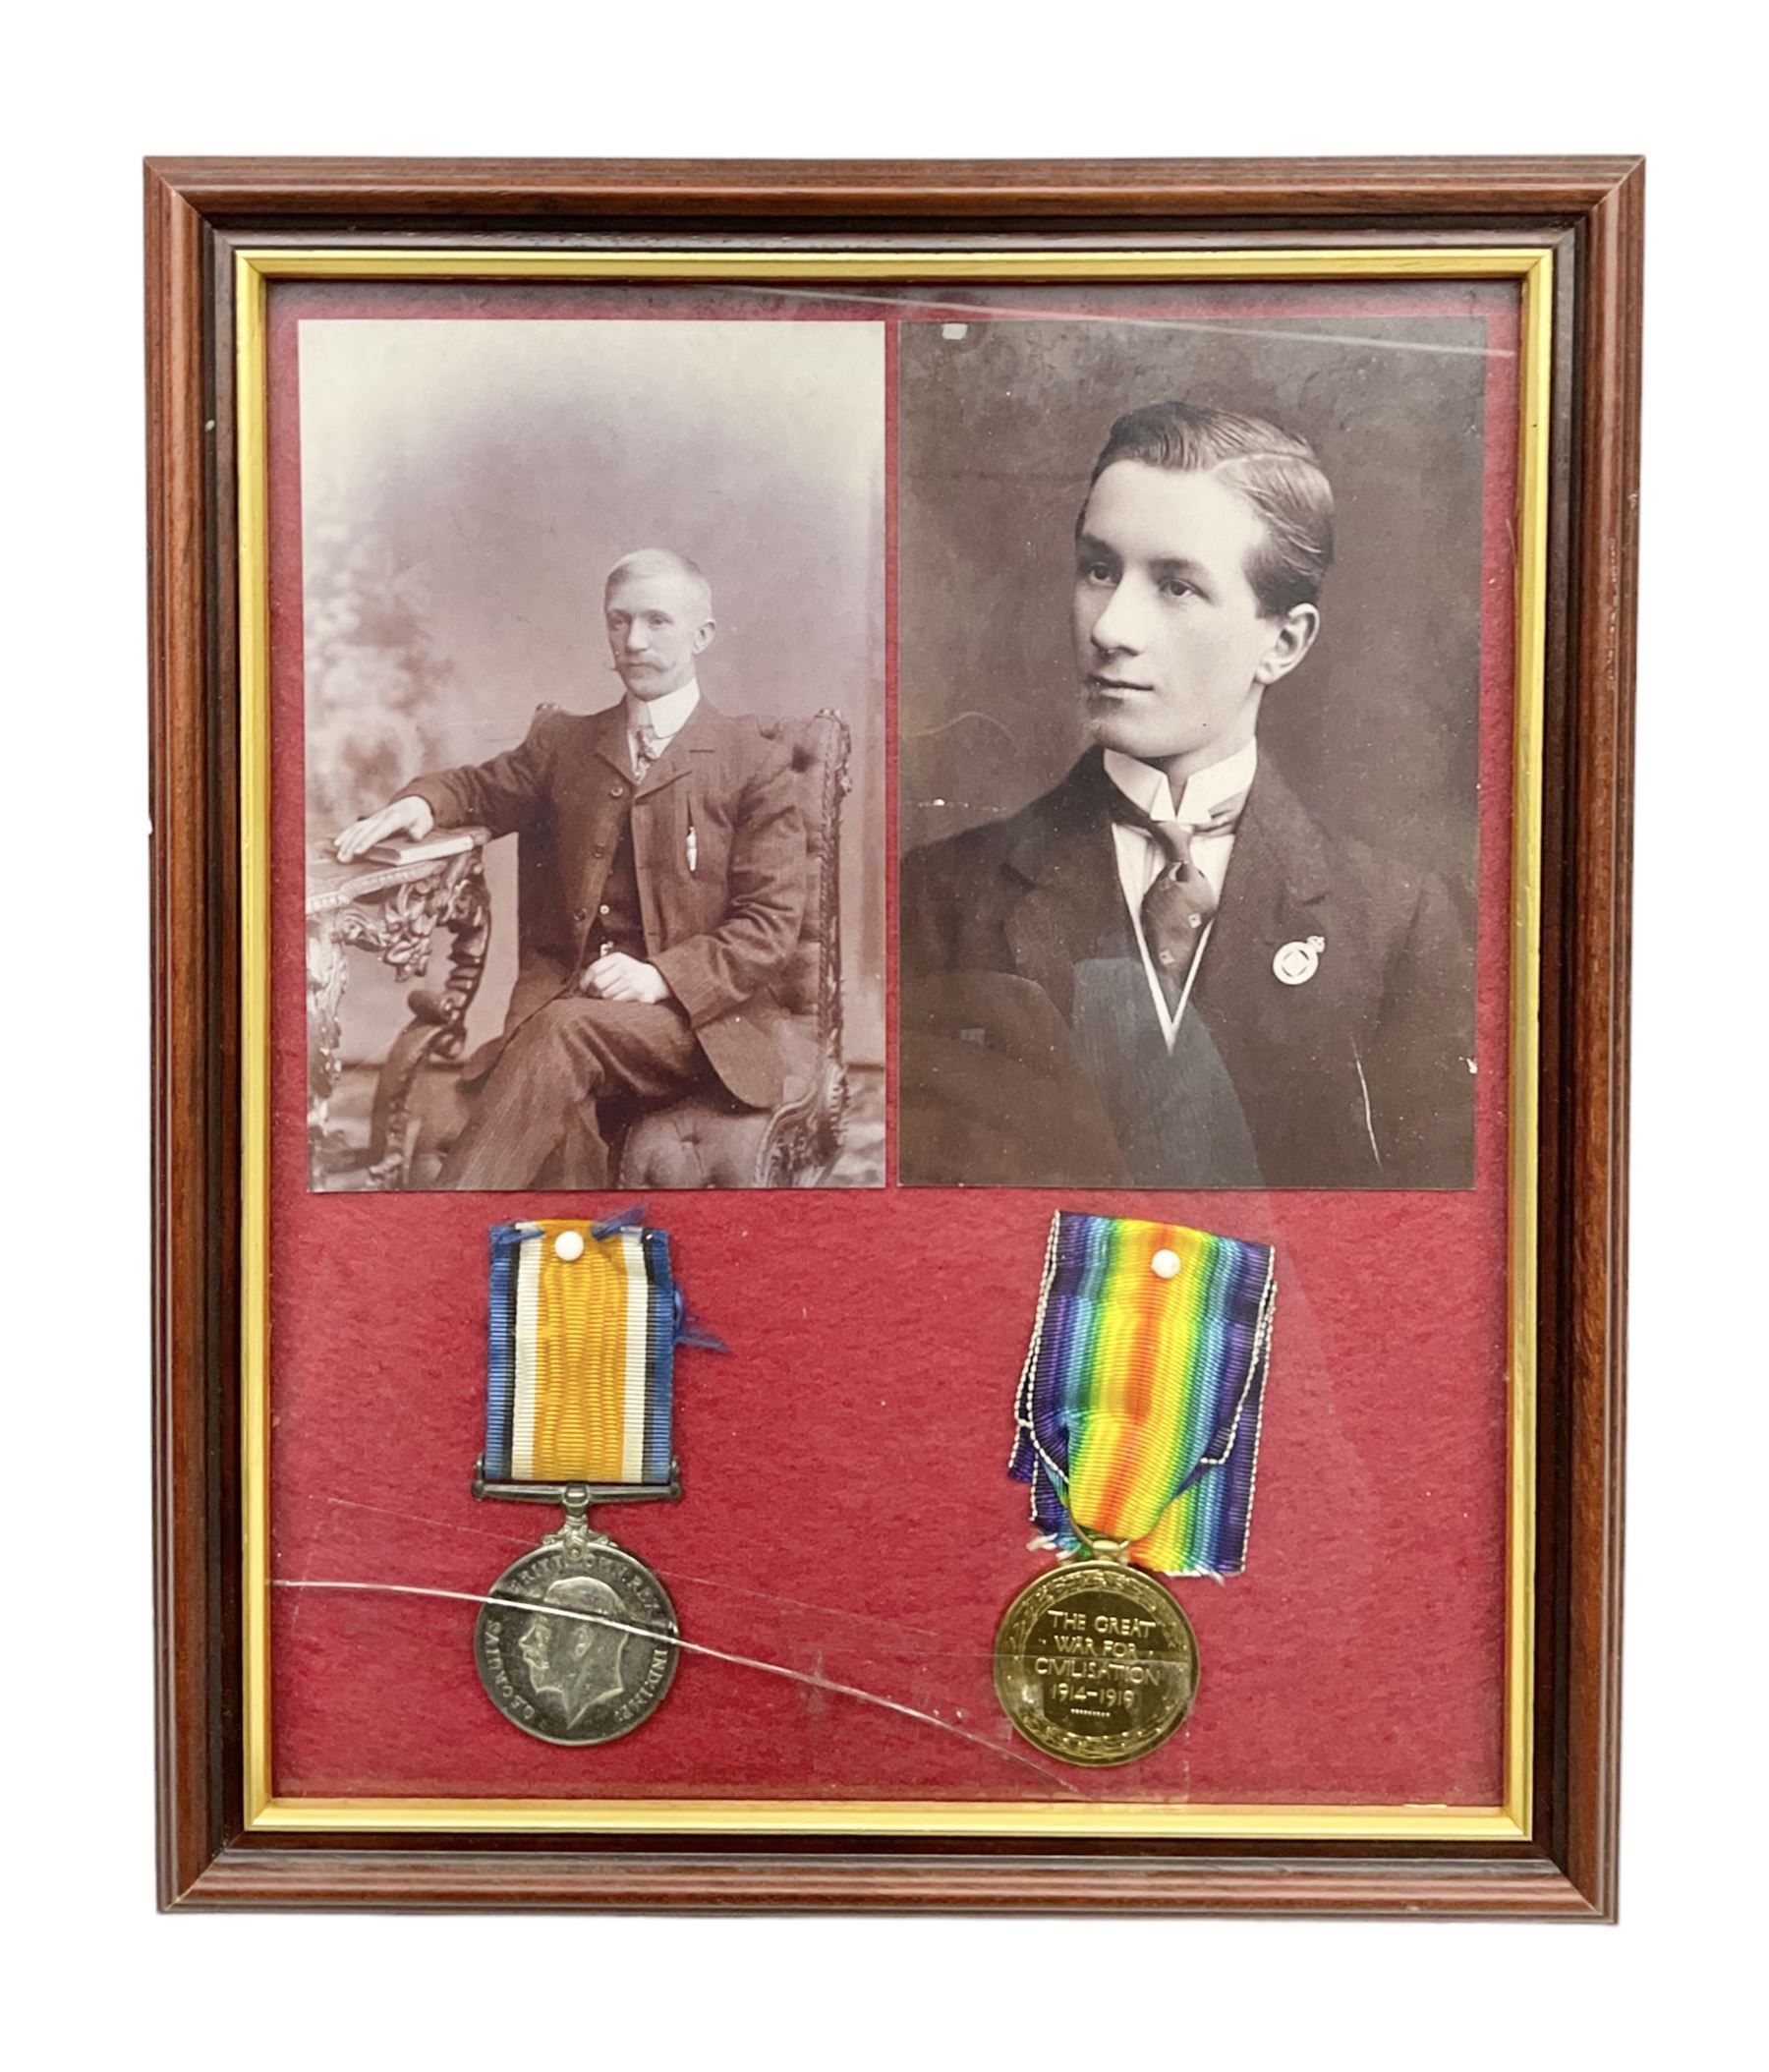 WW1 pair of medals comprising British War Medal and Victory Medal awarded to 104830 Pte. A. Gosling